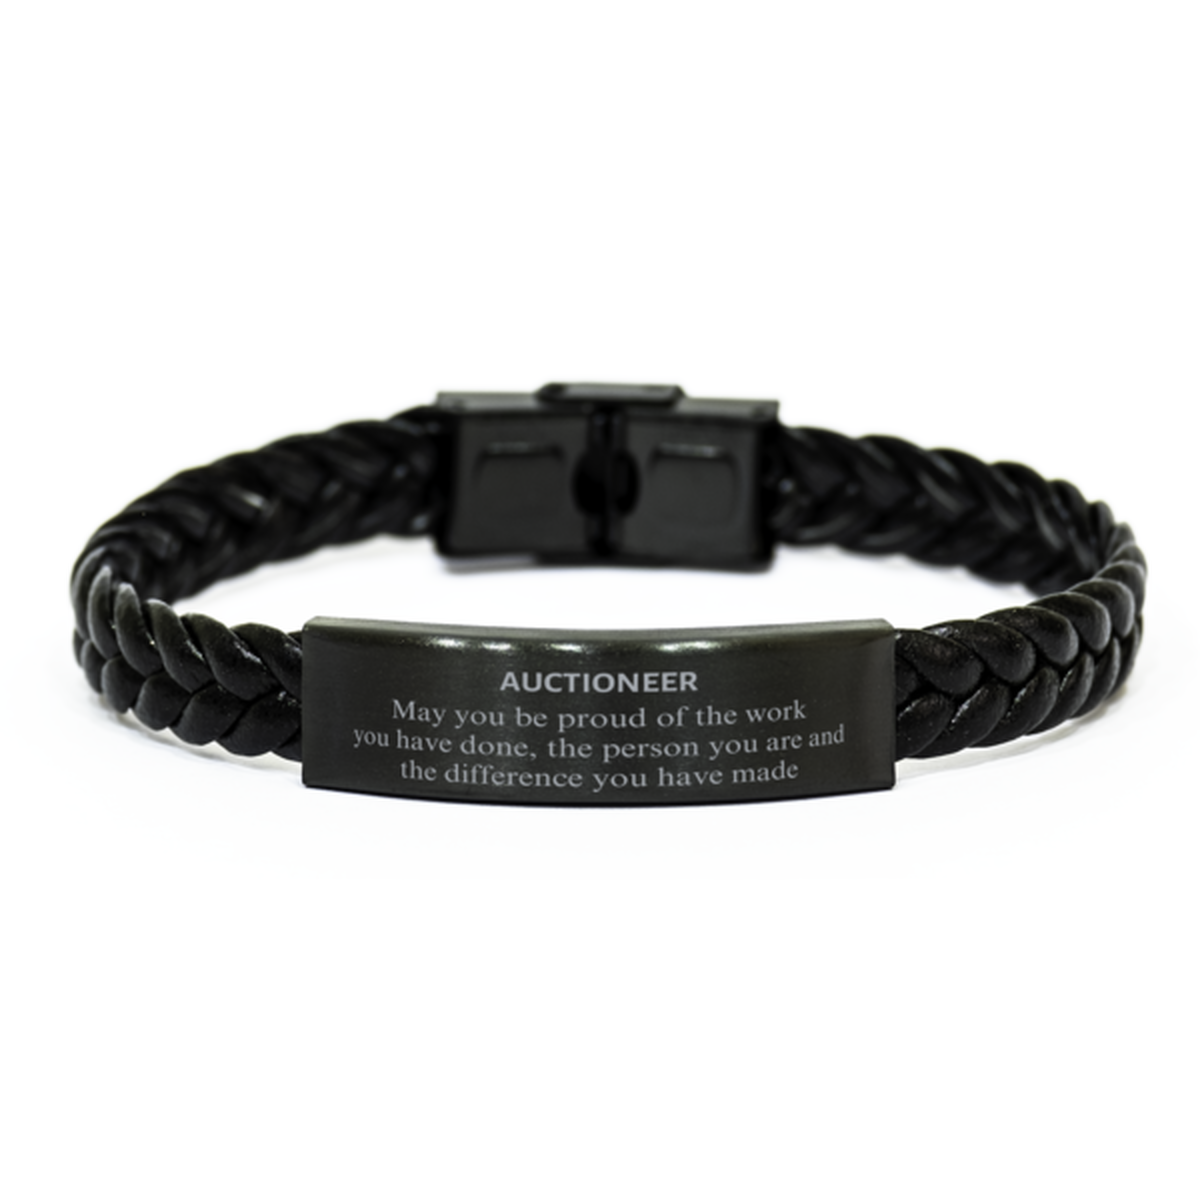 Auctioneer May you be proud of the work you have done, Retirement Auctioneer Braided Leather Bracelet for Colleague Appreciation Gifts Amazing for Auctioneer